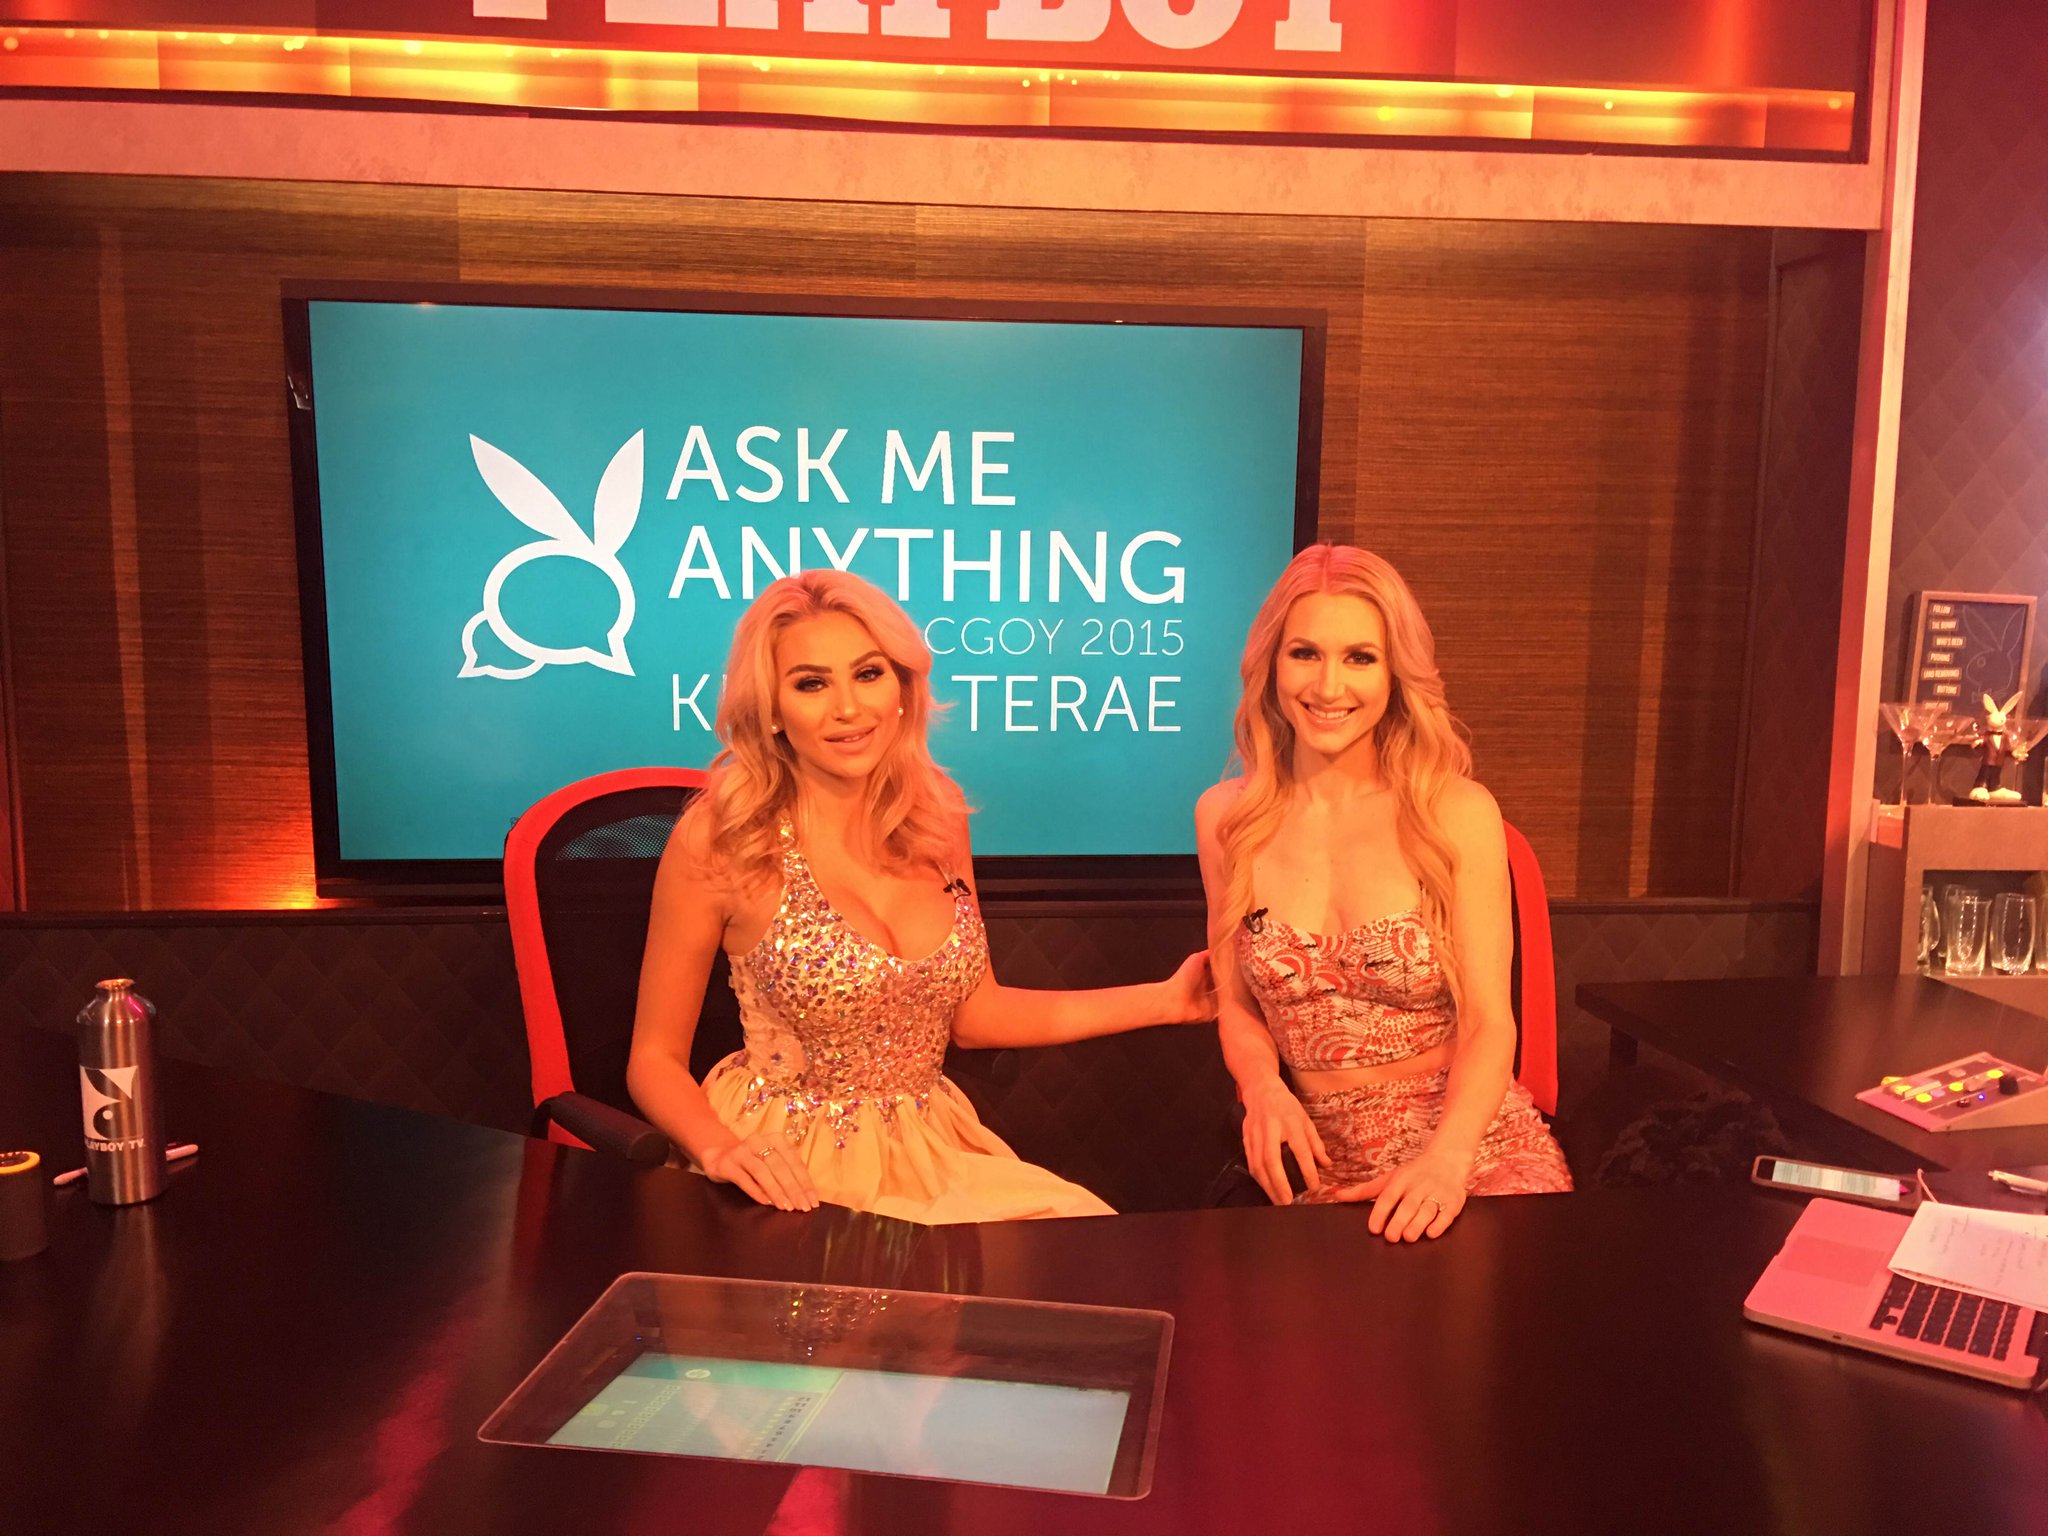 Hey @playboyplus subscribers, our #AMA with @PlaymateKhloe is live now! Join in on the fun: https://t